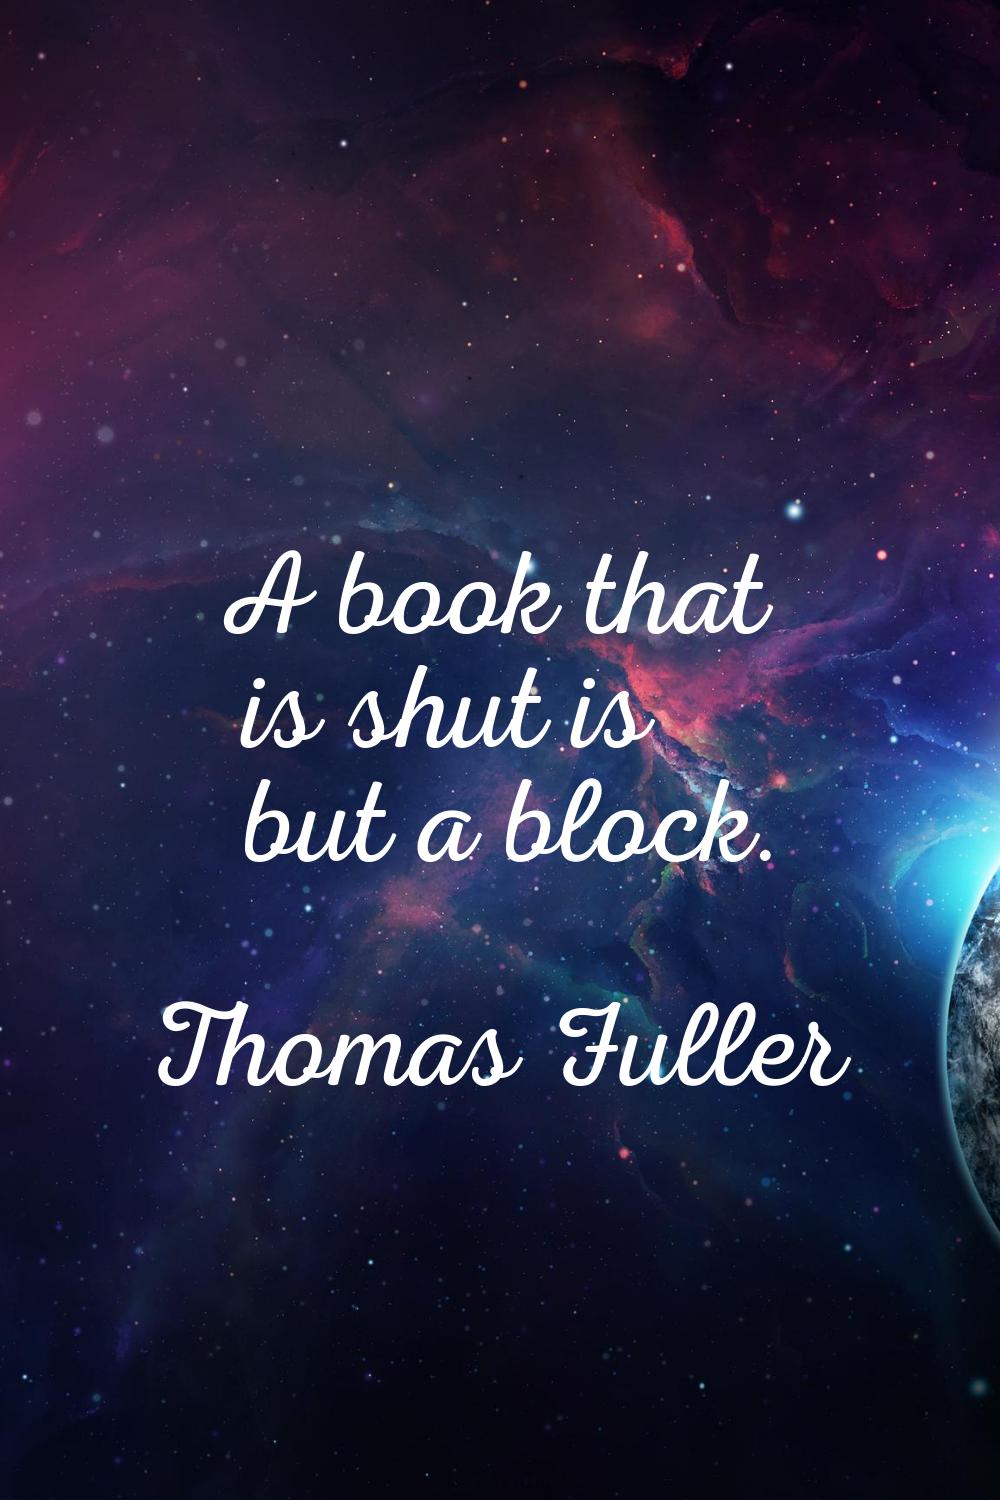 A book that is shut is but a block.